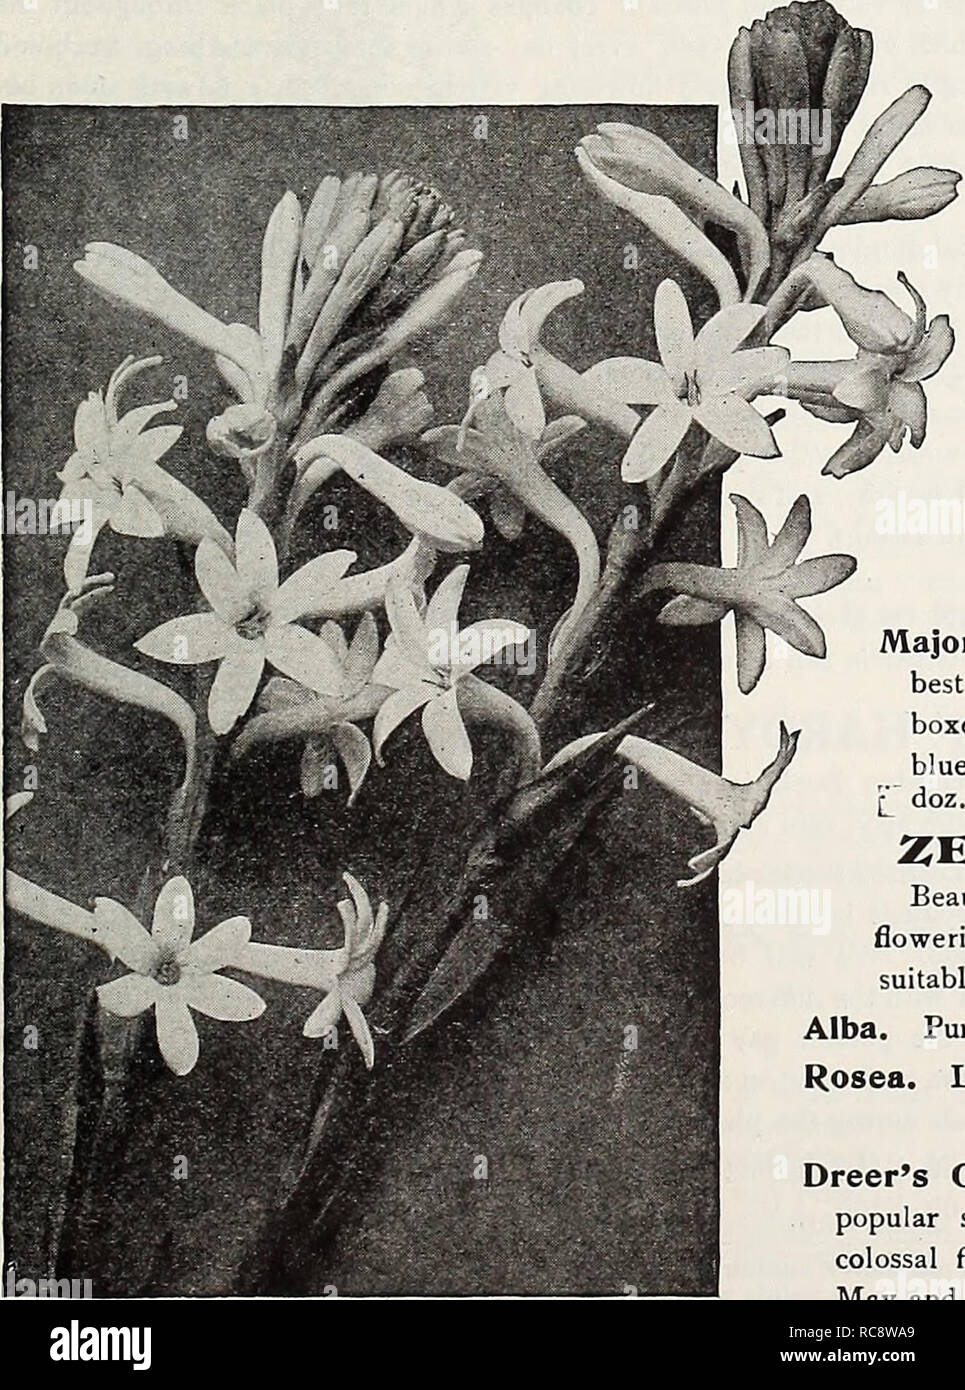 . Dreer's garden book 1921. Seeds Catalogs; Nursery stock Catalogs; Gardening Equipment and supplies Catalogs; Flowers Seeds Catalogs; Vegetables Seeds Catalogs; Fruit Seeds Catalogs. Salvia. Amfkh; ClJJUn OF flRE STIG1IAPHYI.I.ON CII.IATUIH (Brazilian Golden, or Orchid Vine) One of the prettiest tender climljers in cultivation, with large yellow, orchid-like flowers, produced very freely during the summer months. It is especially adapted for training over the pillars or on the wall of a conservatory, but will do equally well iD the open air during the summer. 50 cts. each.. Mexican Everbloomi Stock Photo